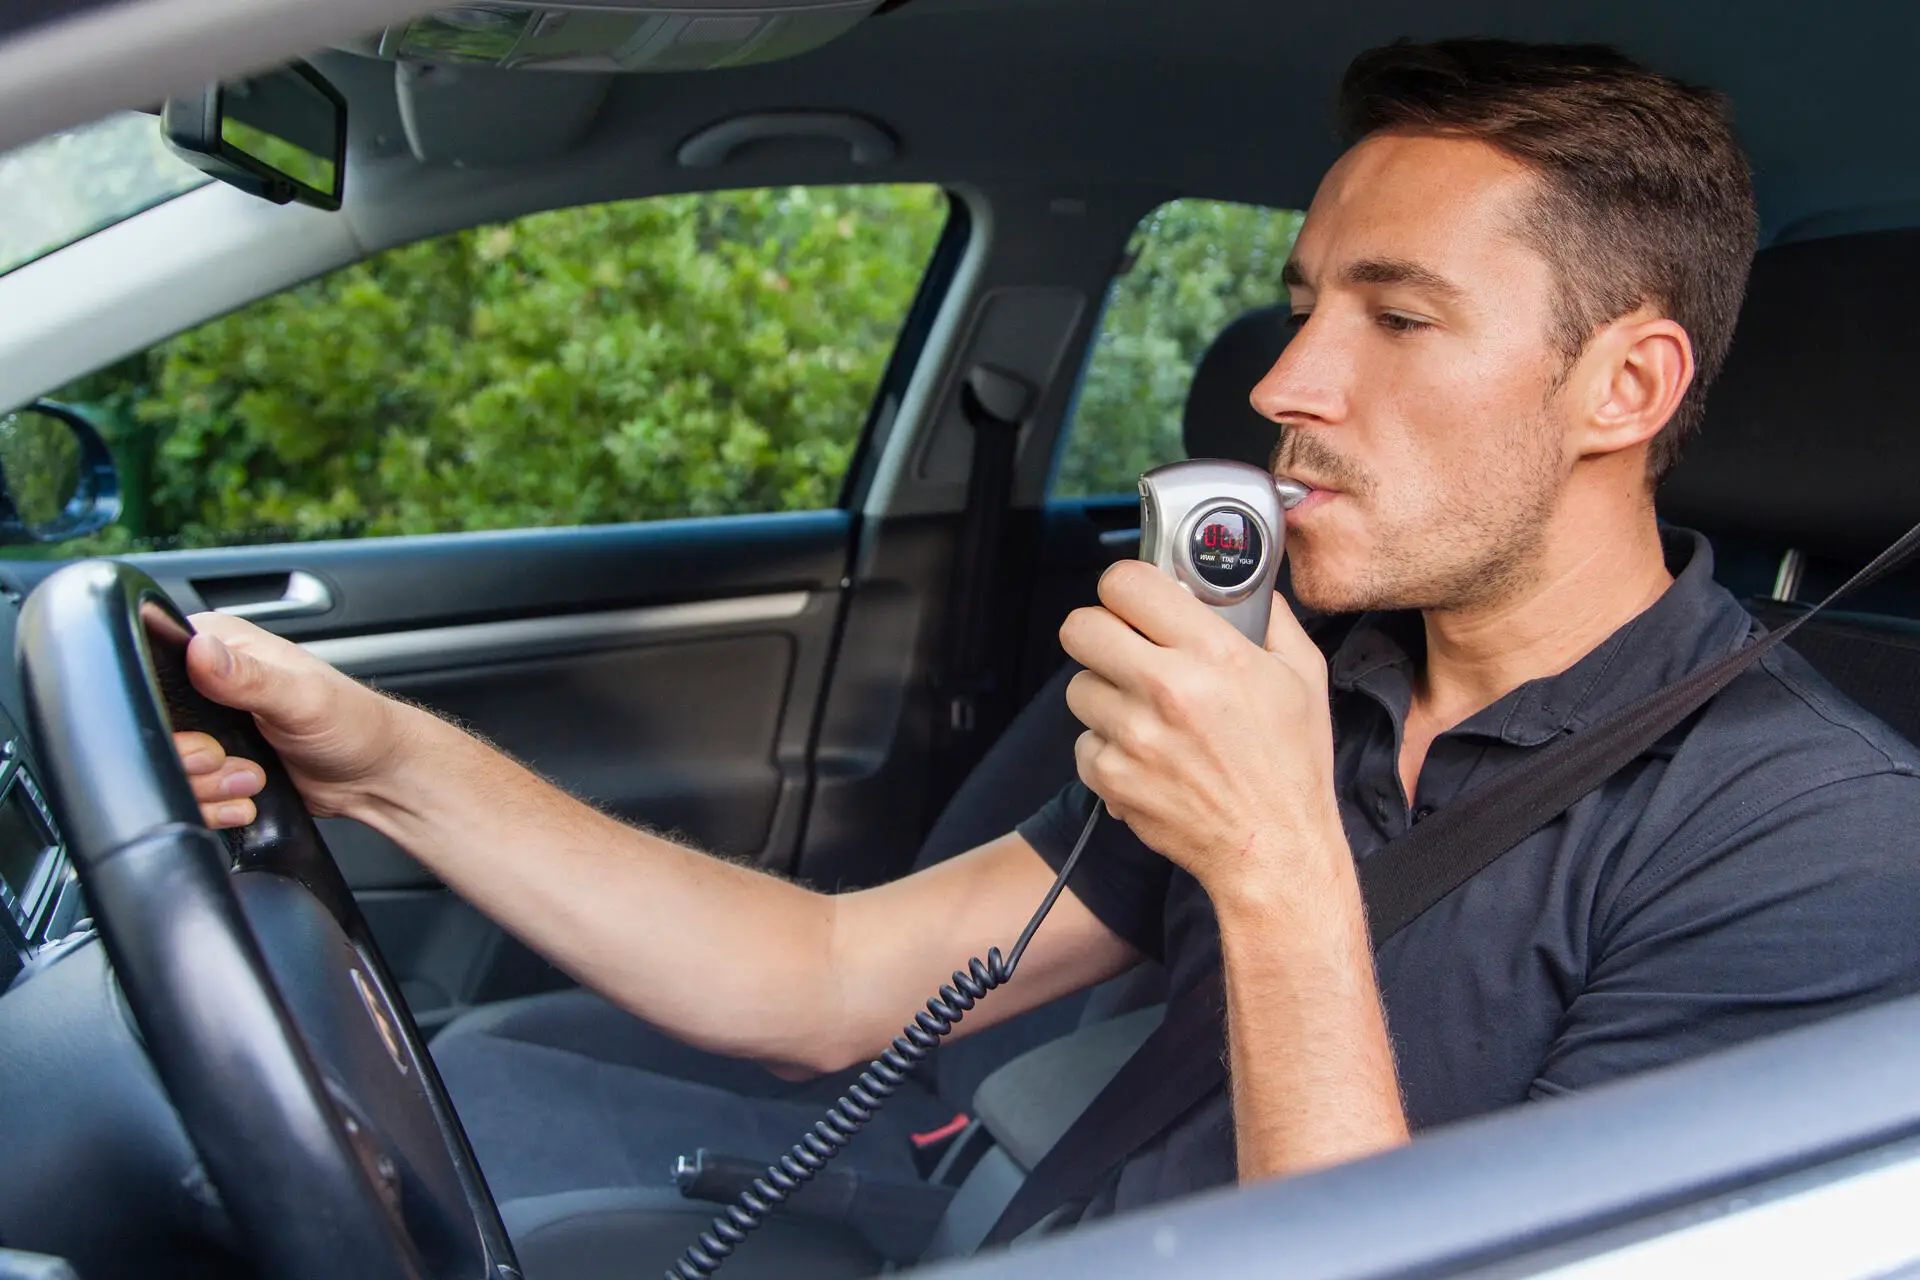 A man blowing into a breathalyzer while sitting behind the wheel